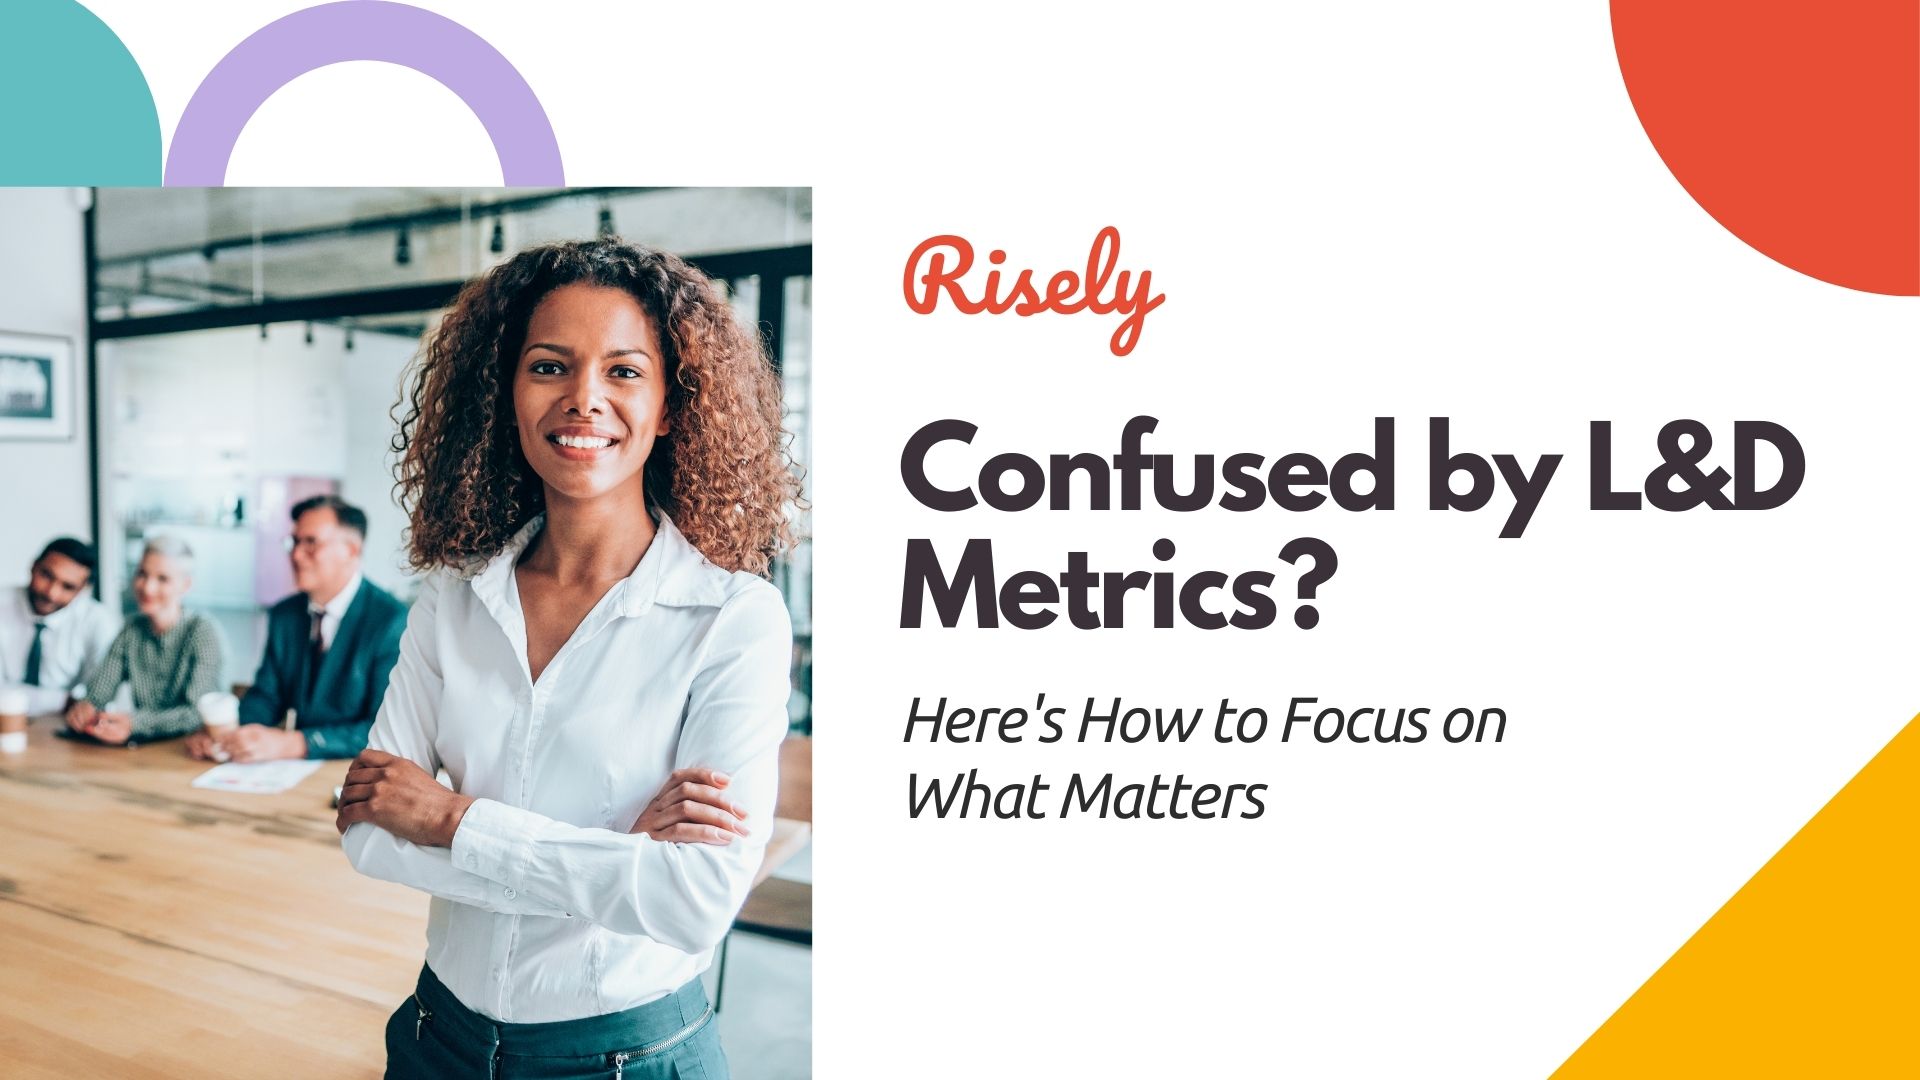 Confused by L&D Metrics? Here’s How to Focus on What Matters